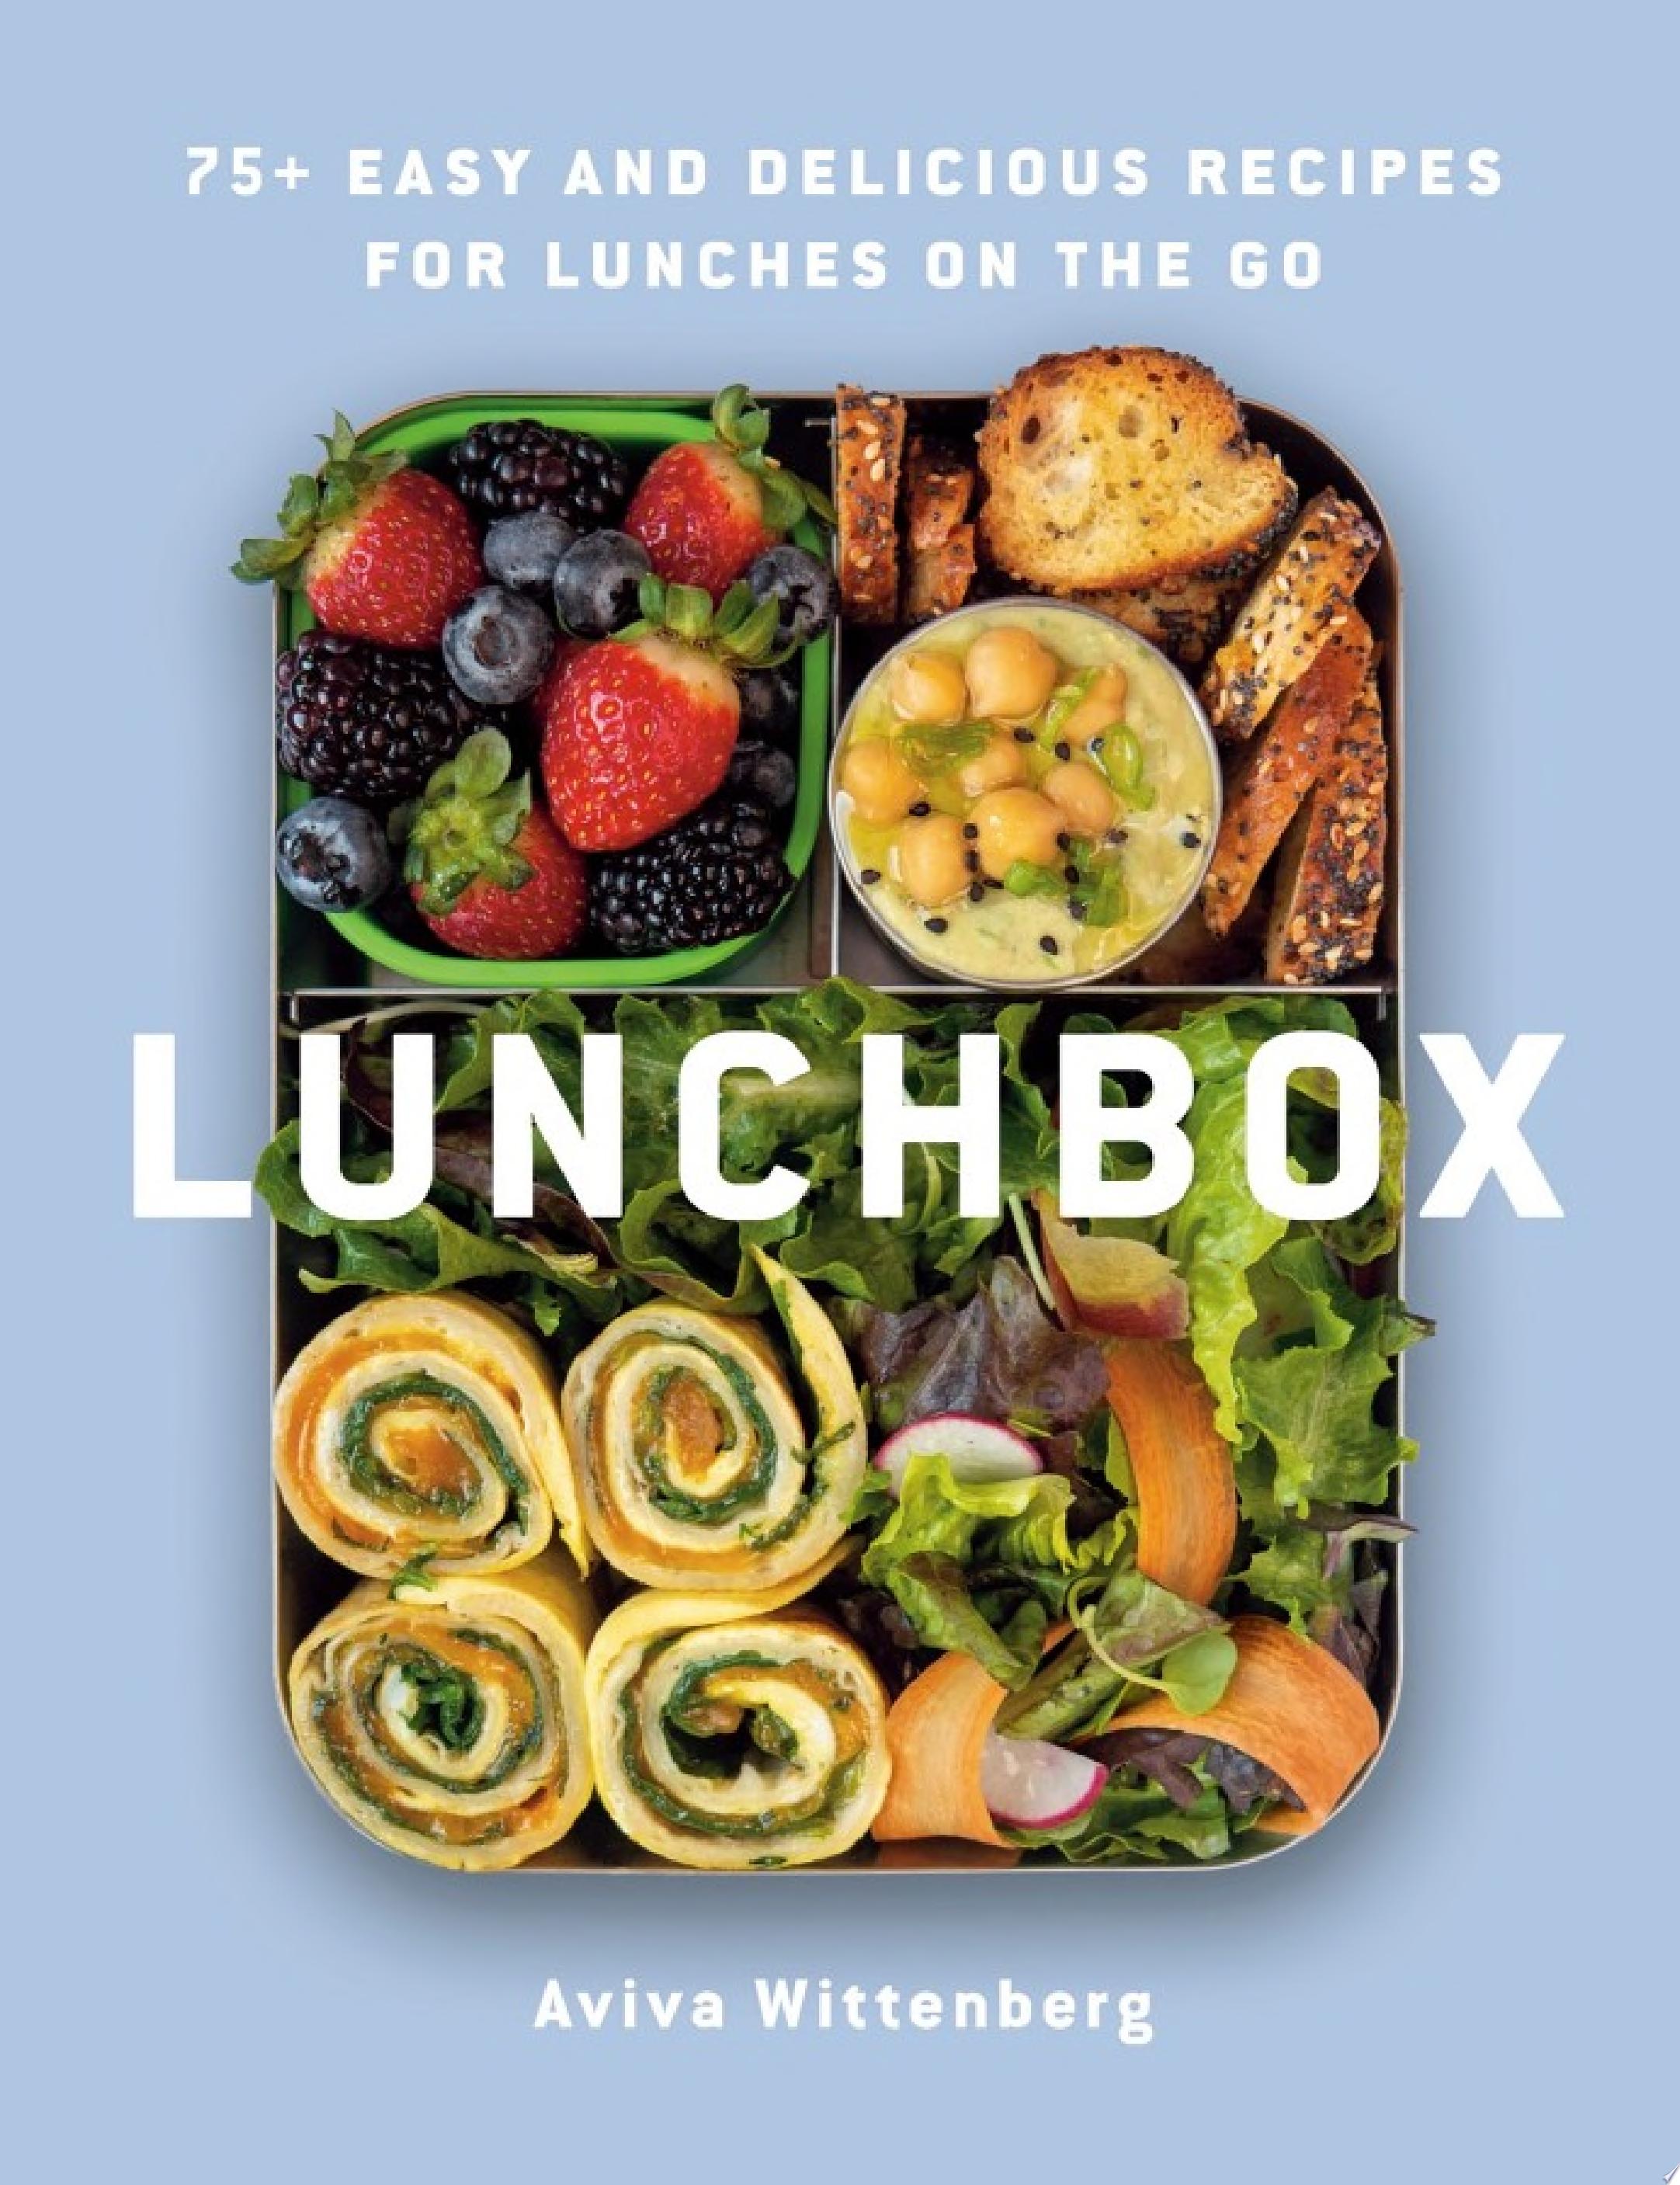 Image for "Lunchbox"